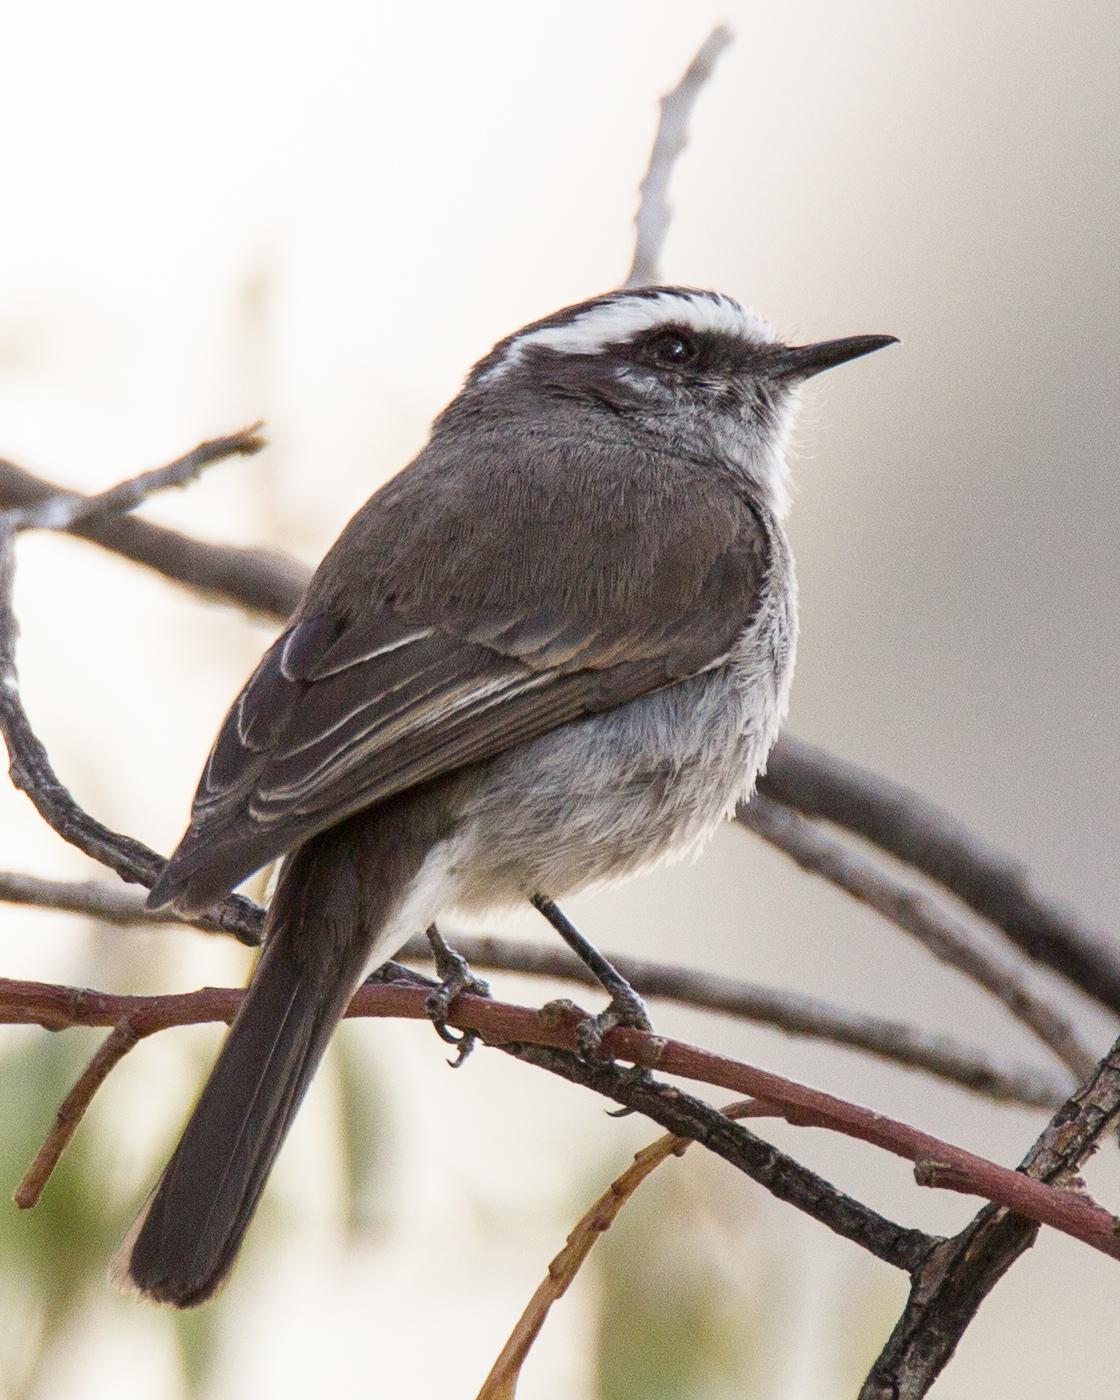 White-browed Chat-Tyrant Photo by Robert Lewis